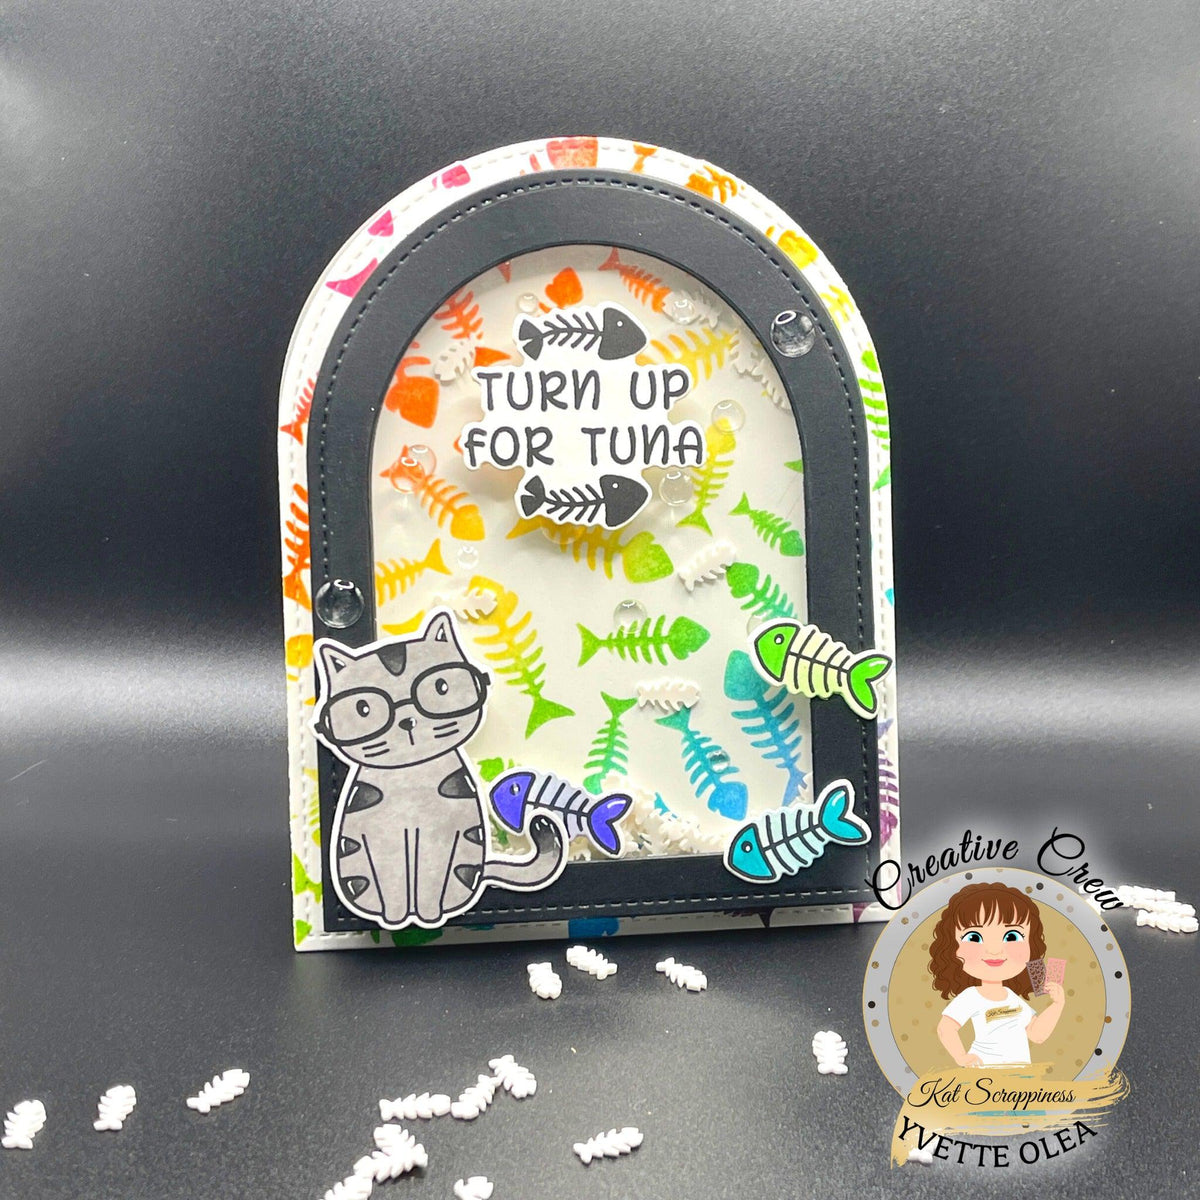 Pawsome Cats Sentiments Stamp Set